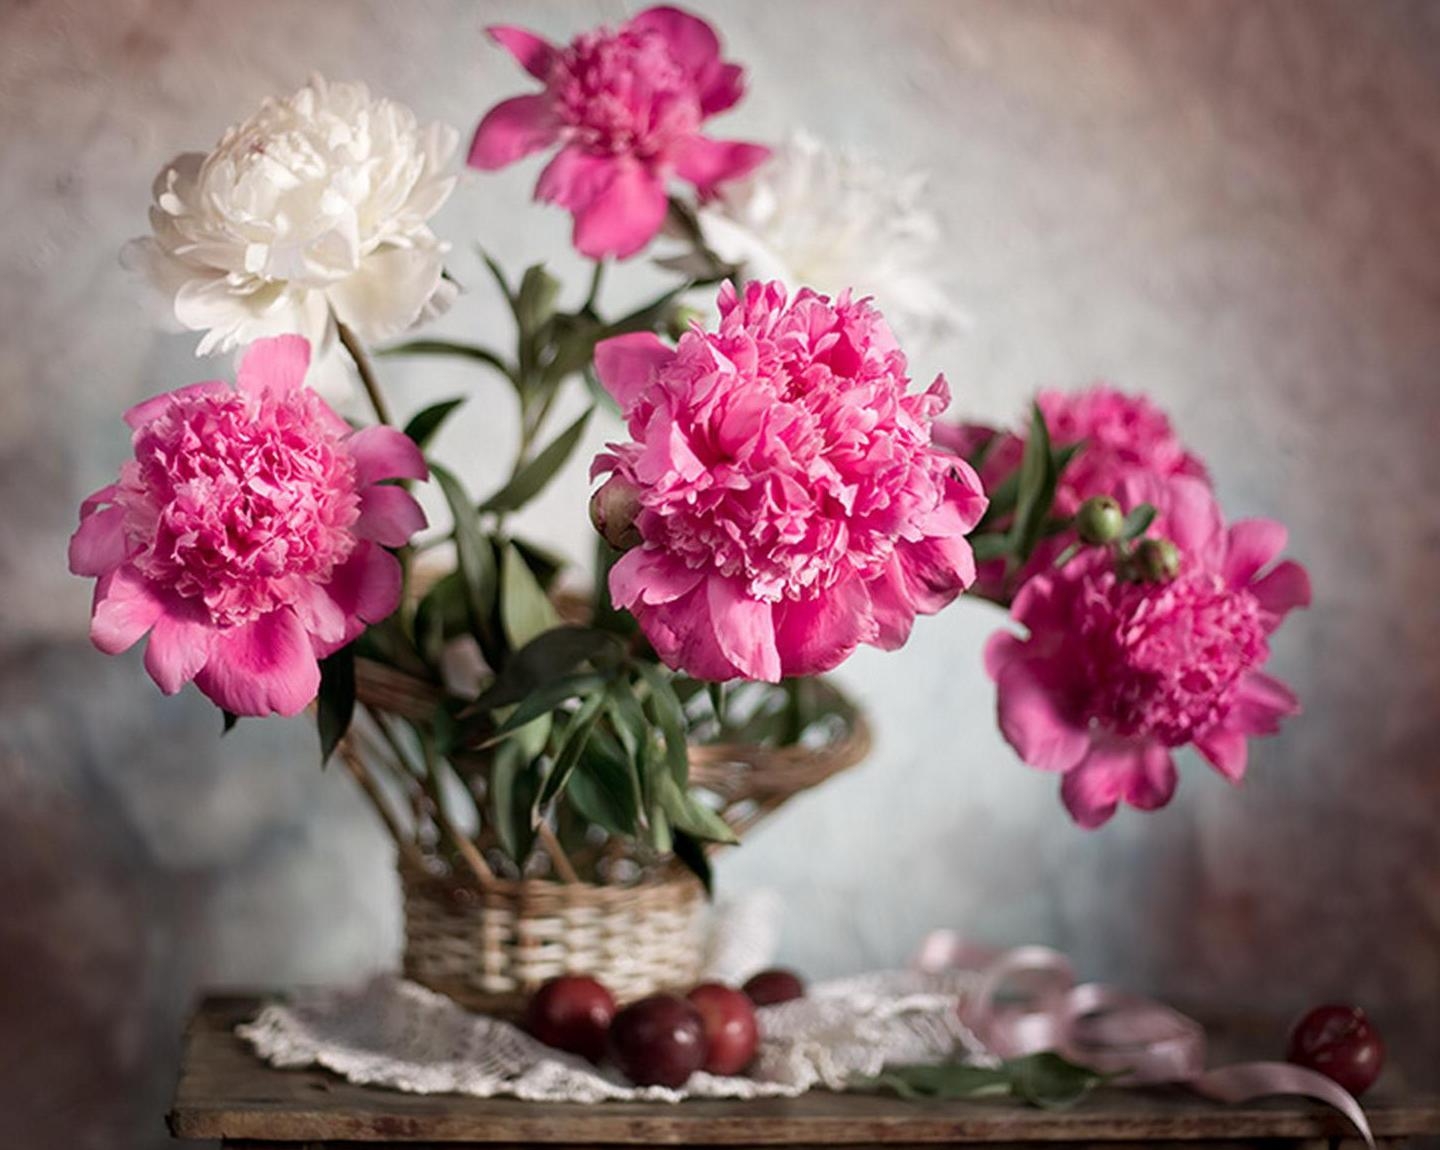 flowers, peonies, blur, smooth, bouquet, tape, basket